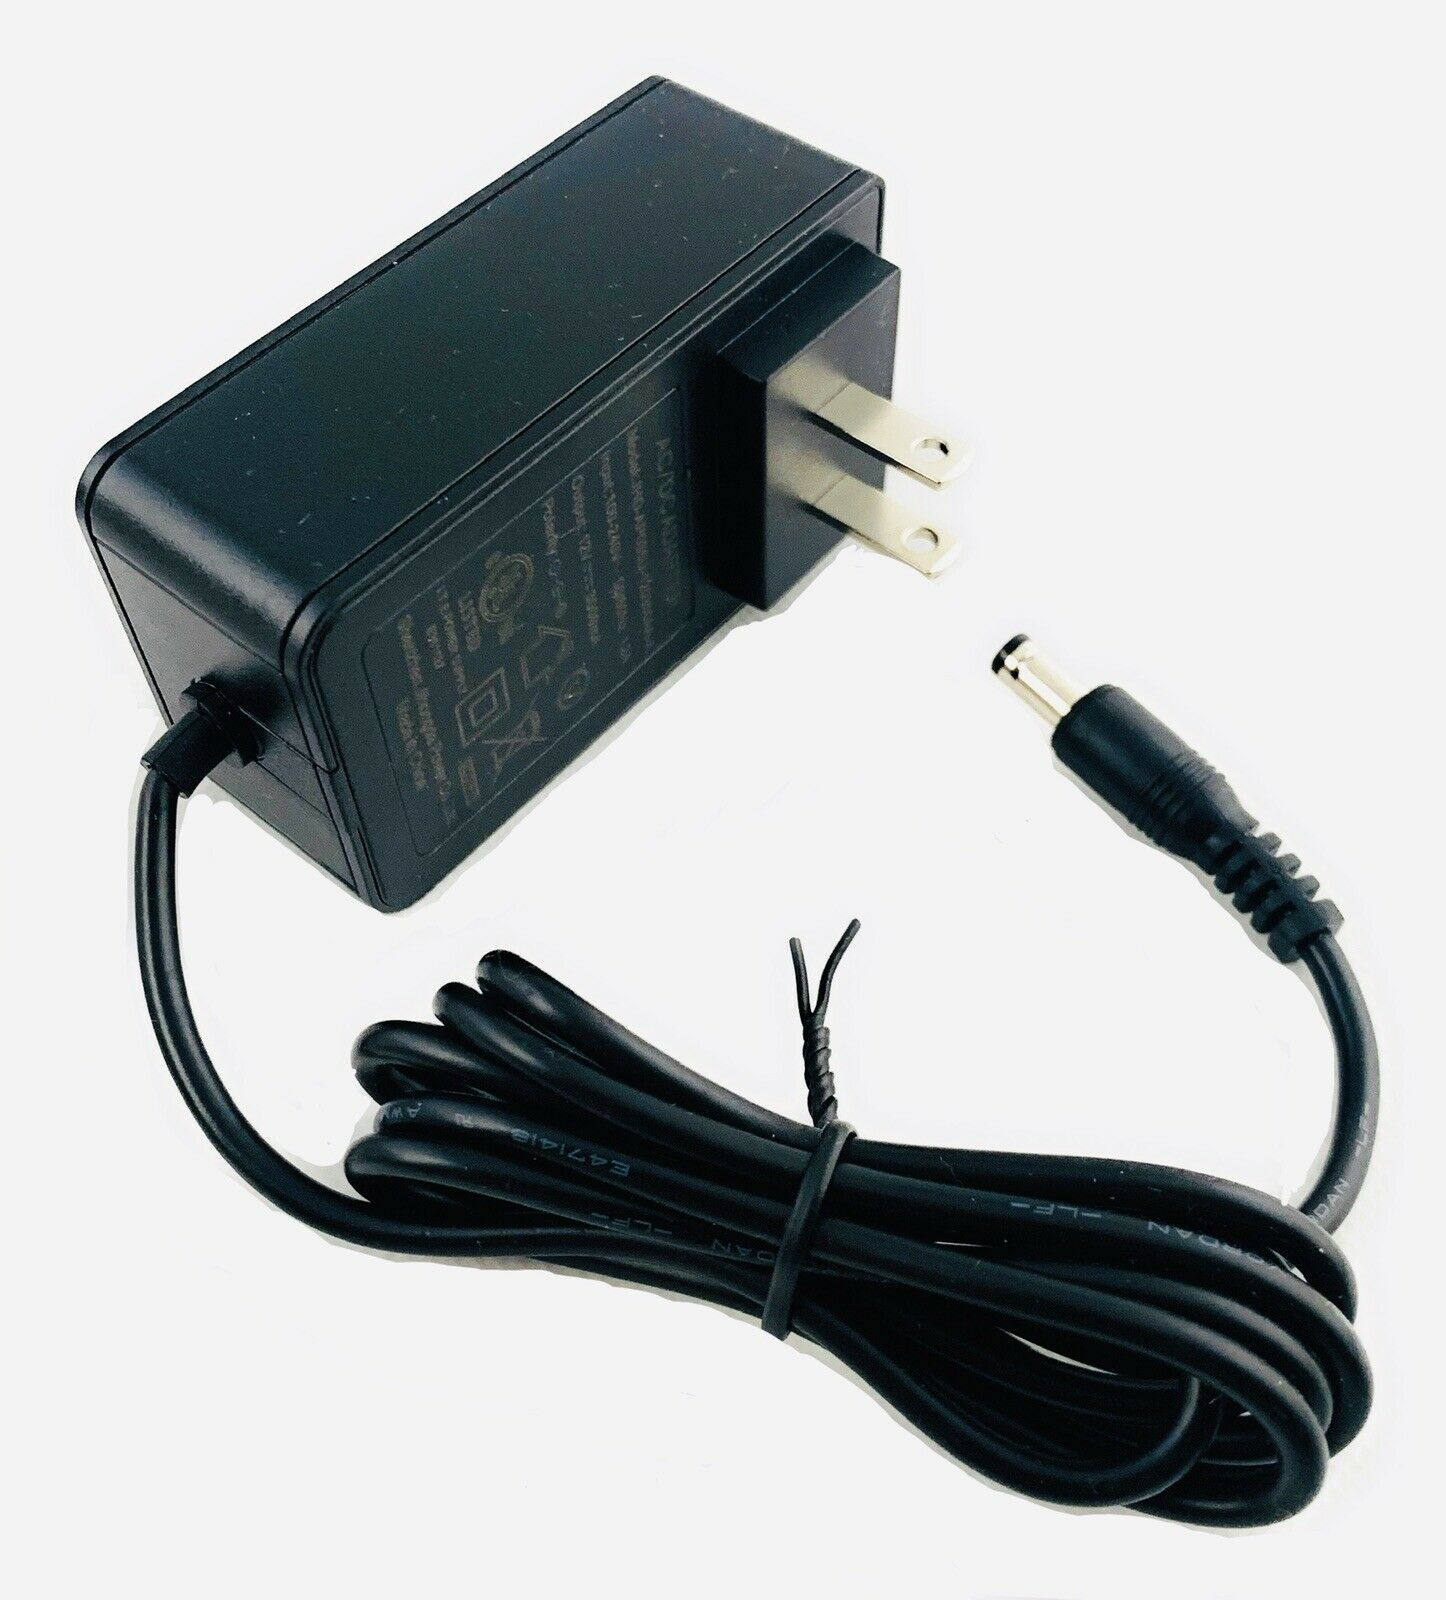 AC-DC Power Supply Adapter Charger, 100V-240V 1.2a Input, 12v 3A 3000mA Output Brand: Unbranded Type: AC/DC Adapter